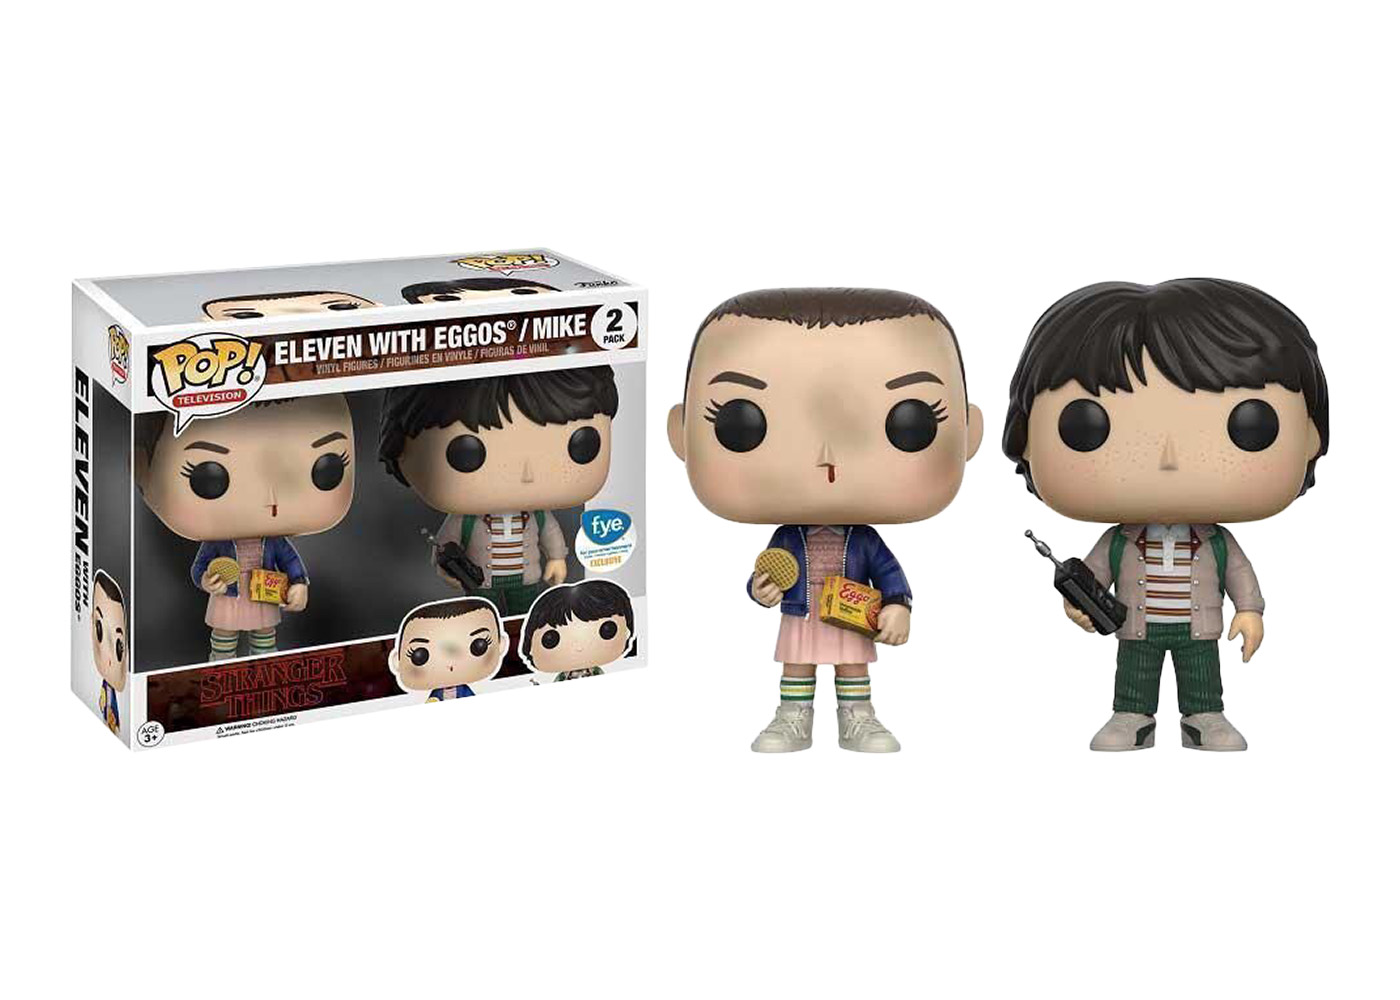 Funko Pop! Television Stranger Things Eleven with Eggos & Mike FYE